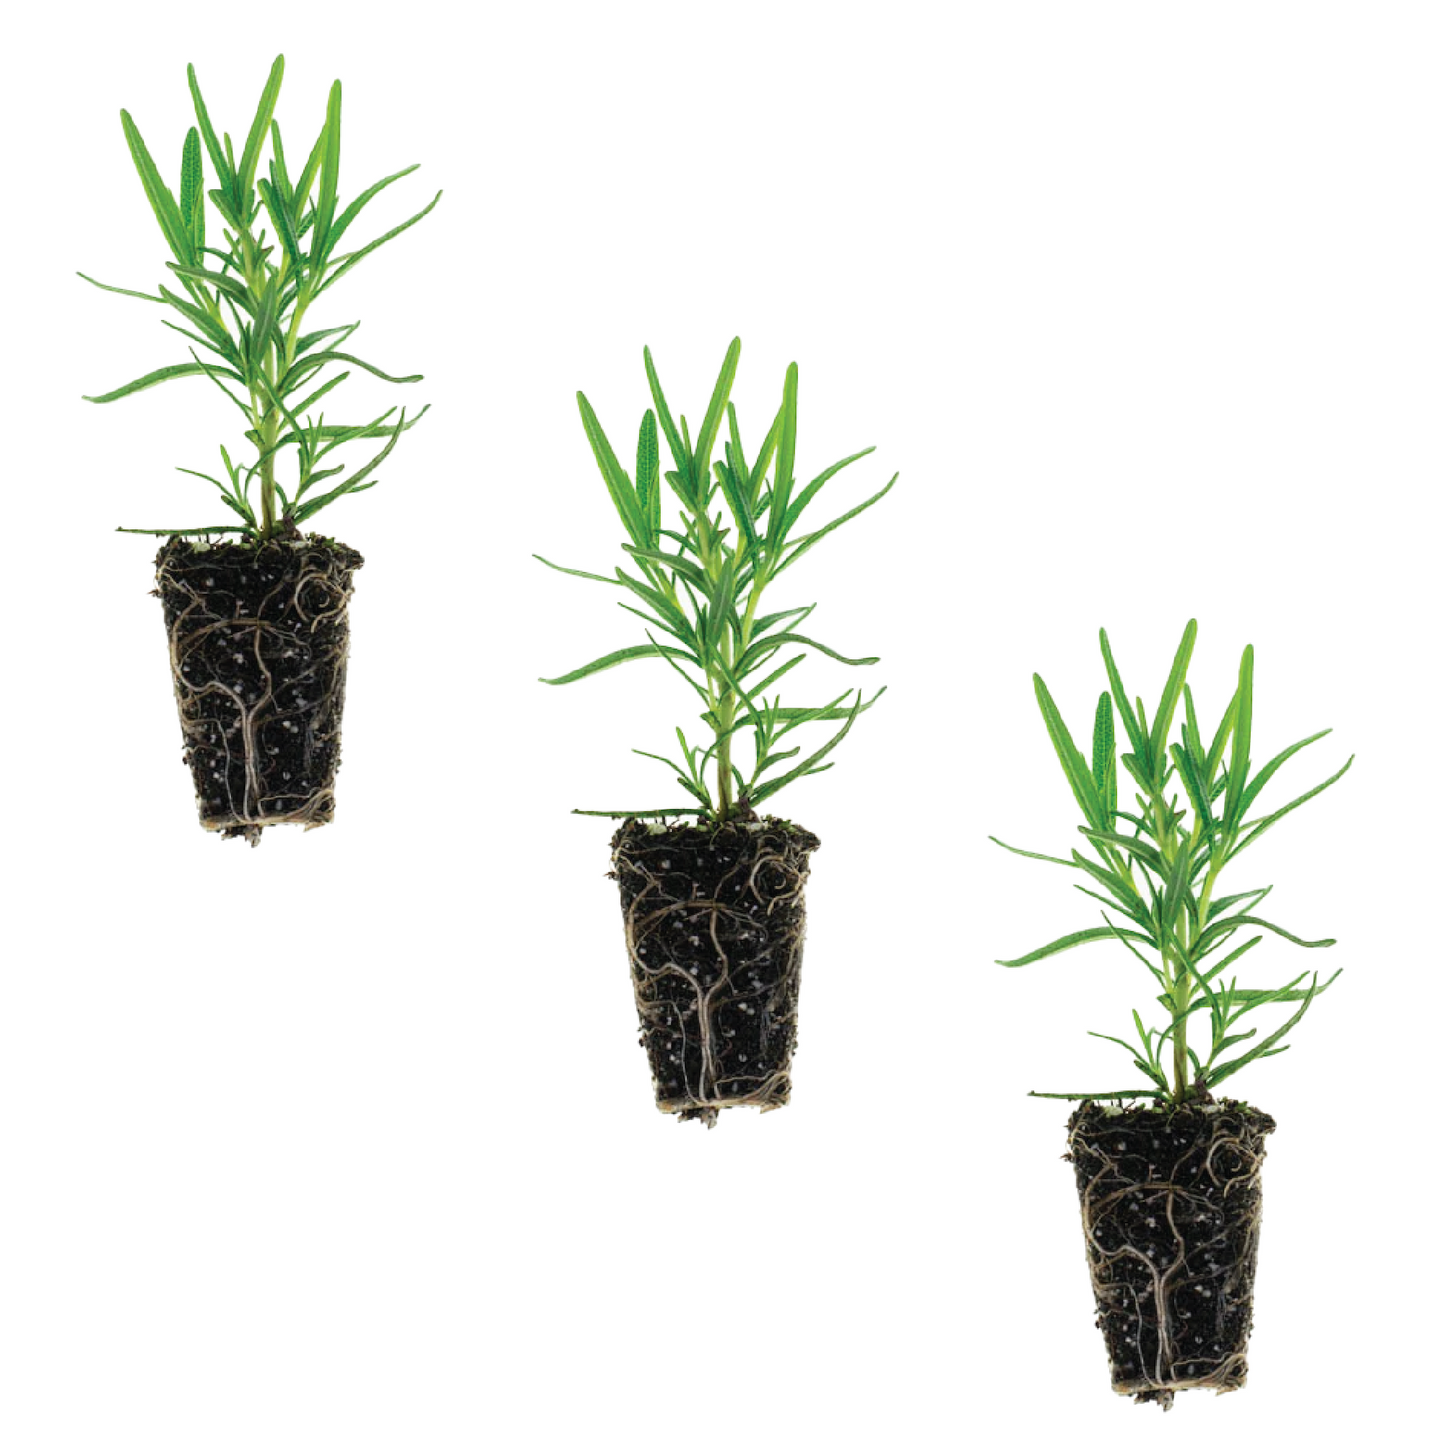 Rosemary Barbecue Plantlings Live Baby Plants 1-3in., 3-Pack